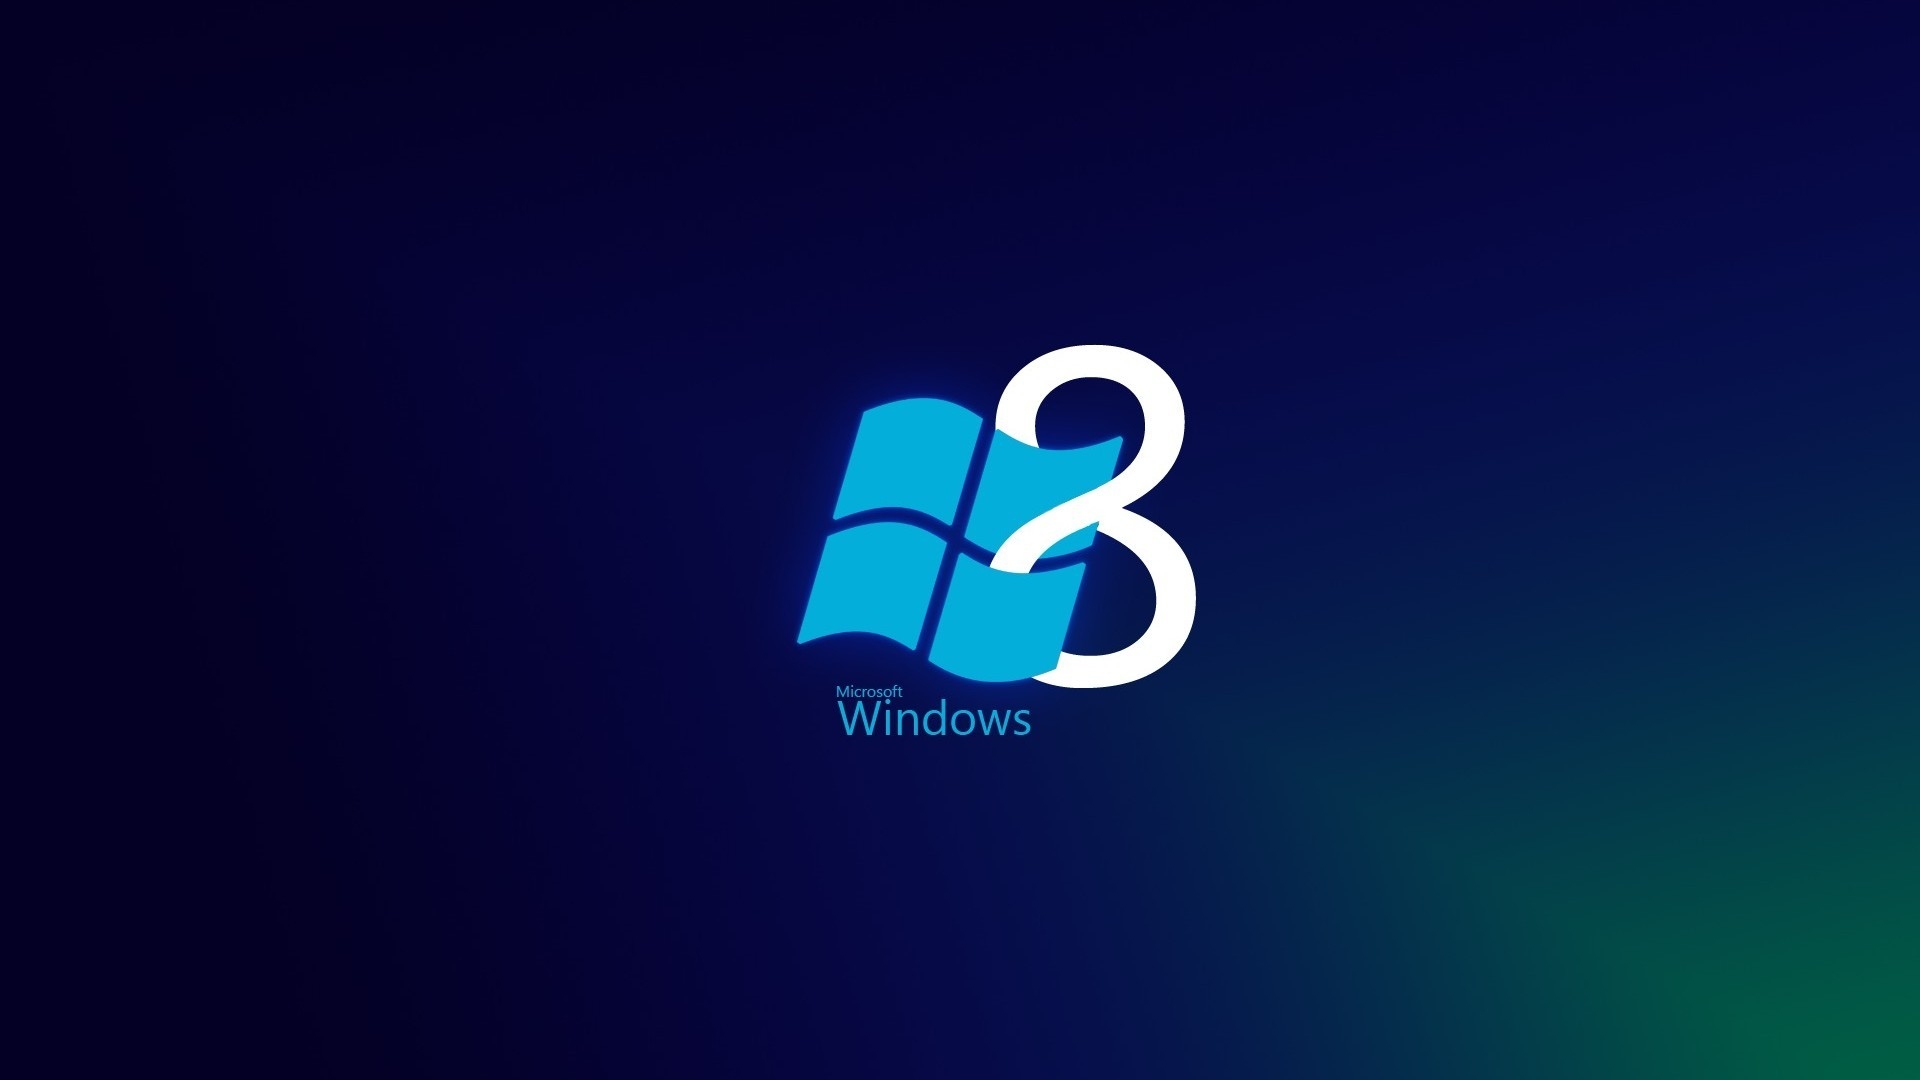 Windows 8 Blue Style for 1920 x 1080 HDTV 1080p resolution